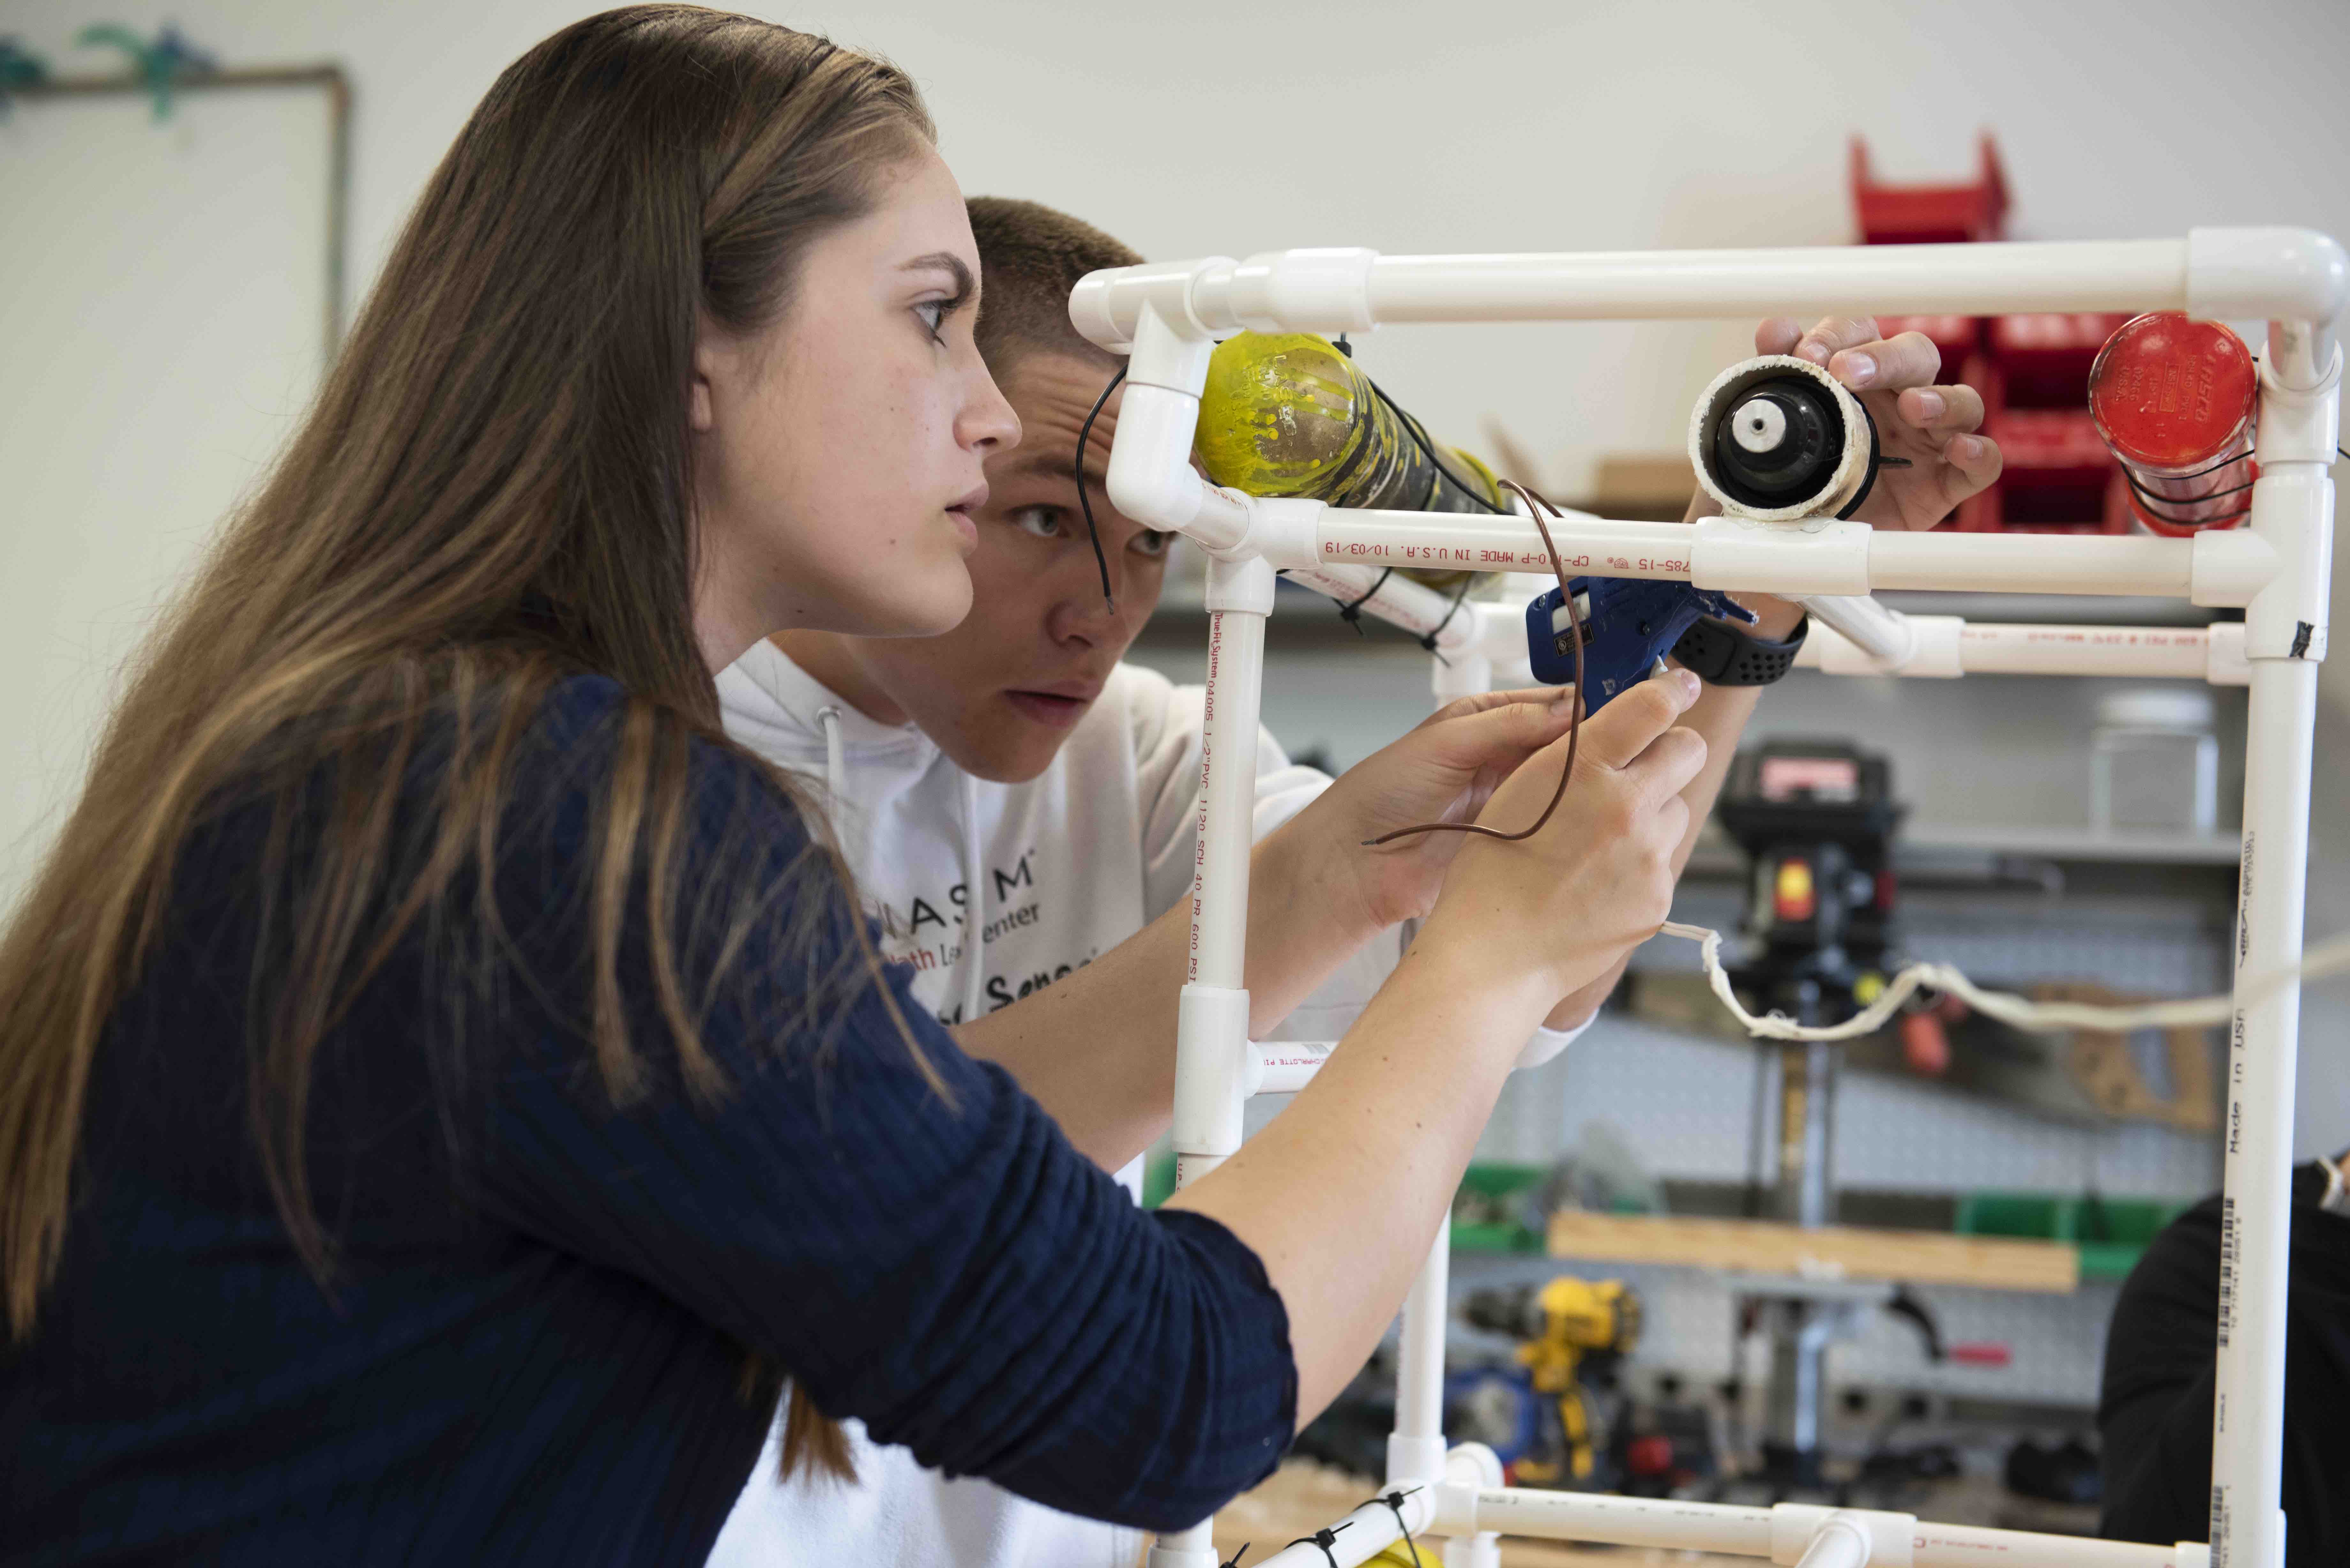 Associate Professor of Engineering Scott Wolter works with students in his Grand Challenges for Engineering class in the engineering workshop on campus. They are designing and constructing underwater remotely-operated-vehicles